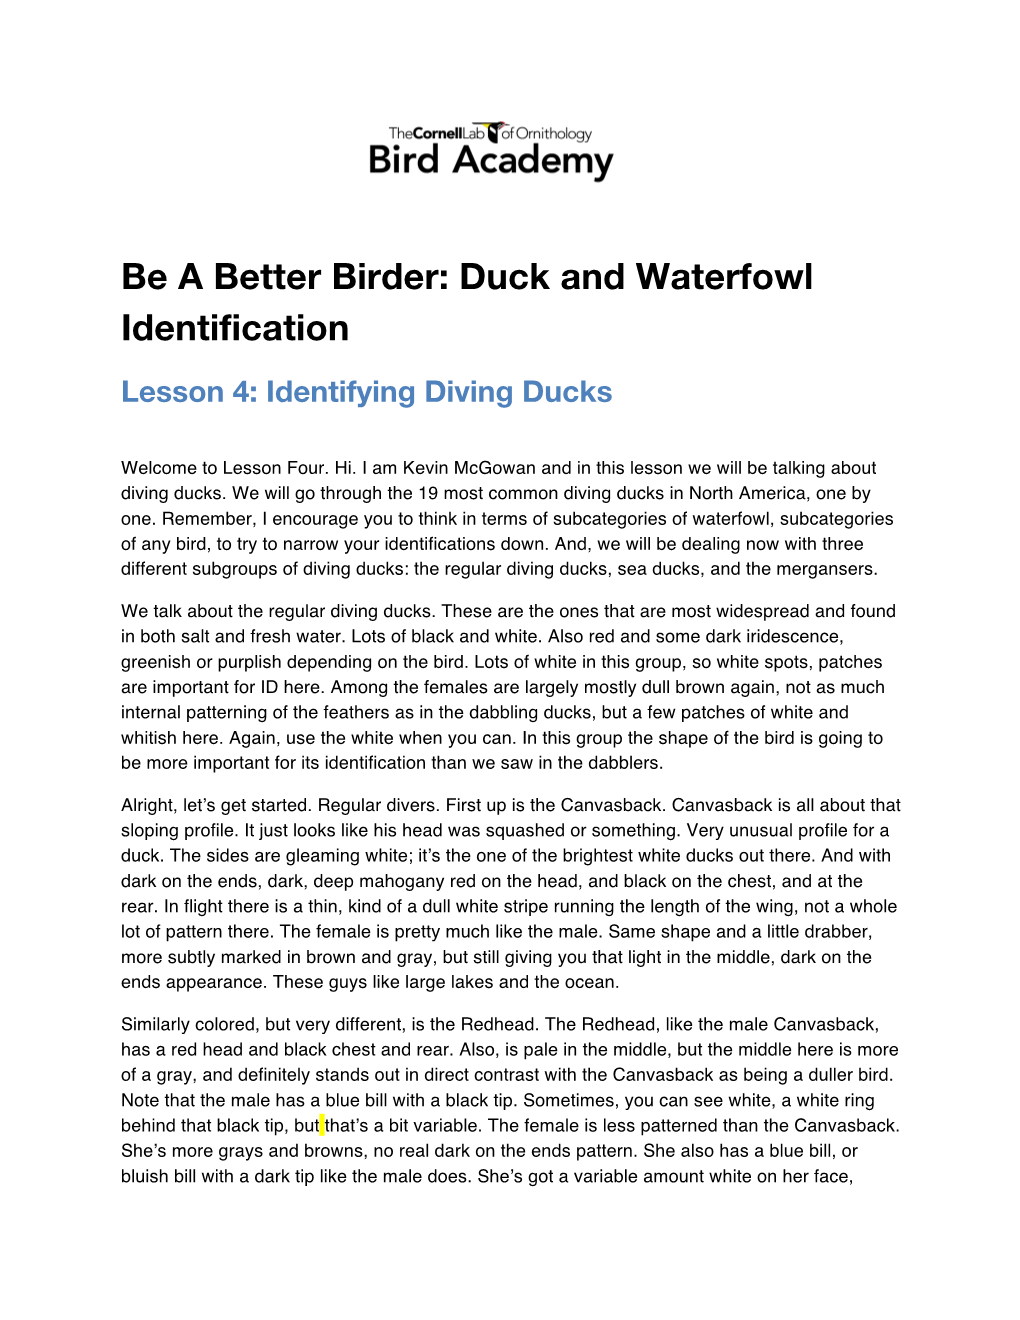 Duck and Waterfowl Identification